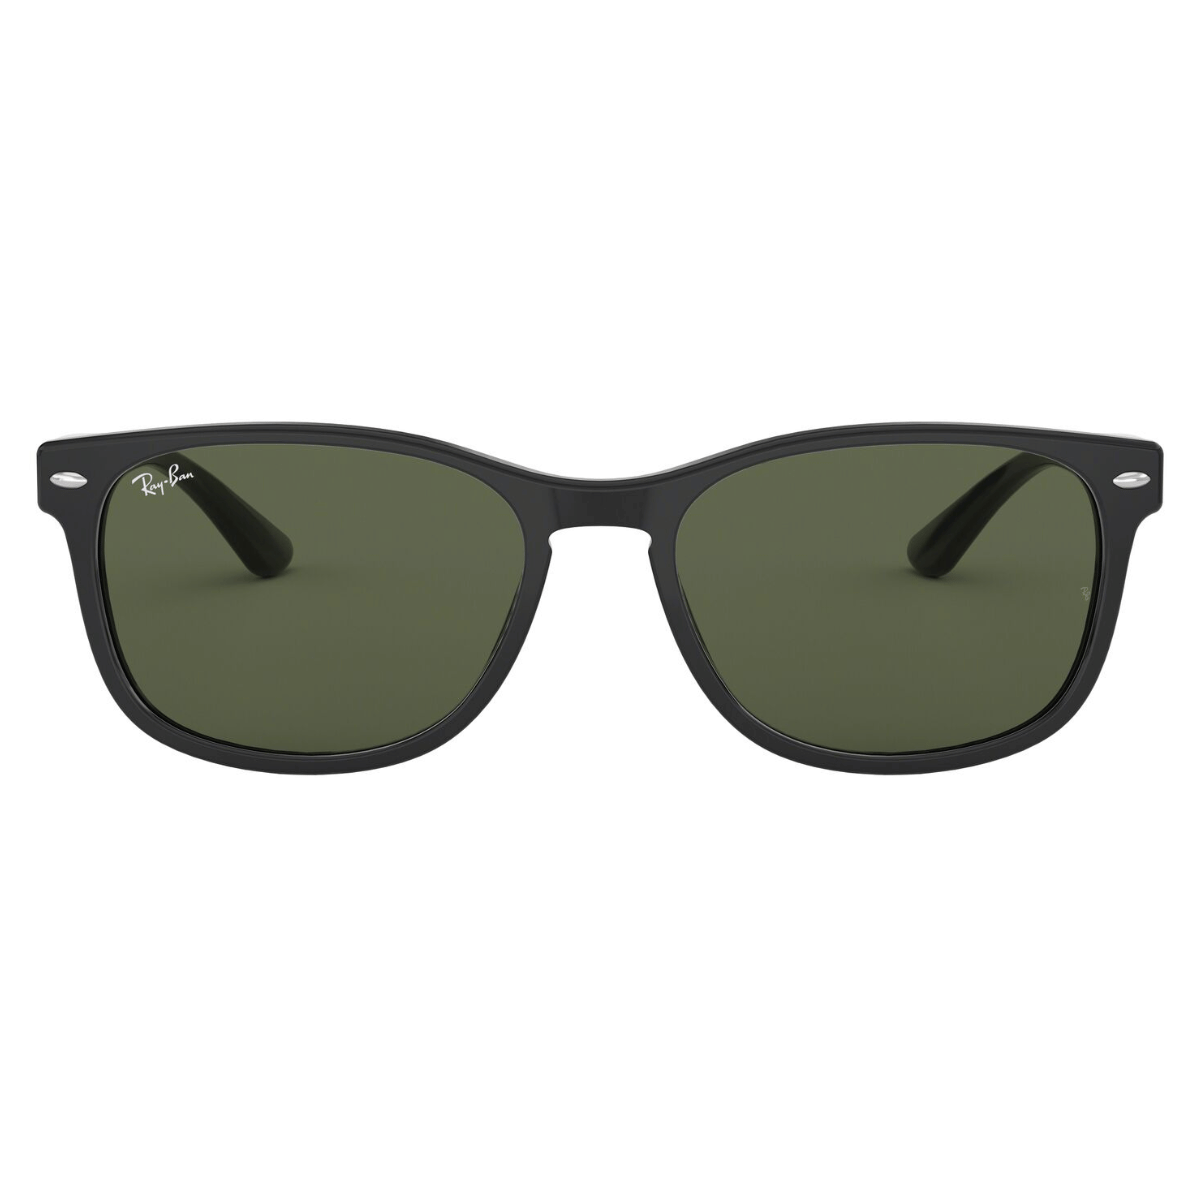 "Shop Ray Ban Wayfarer Glasses: Find unbeatable deals on Ray Ban 2184 Sunglasses at Optorium. Enjoy free shipping on all orders and get your hands on stylish Ray Ban eyewear for men and women today."